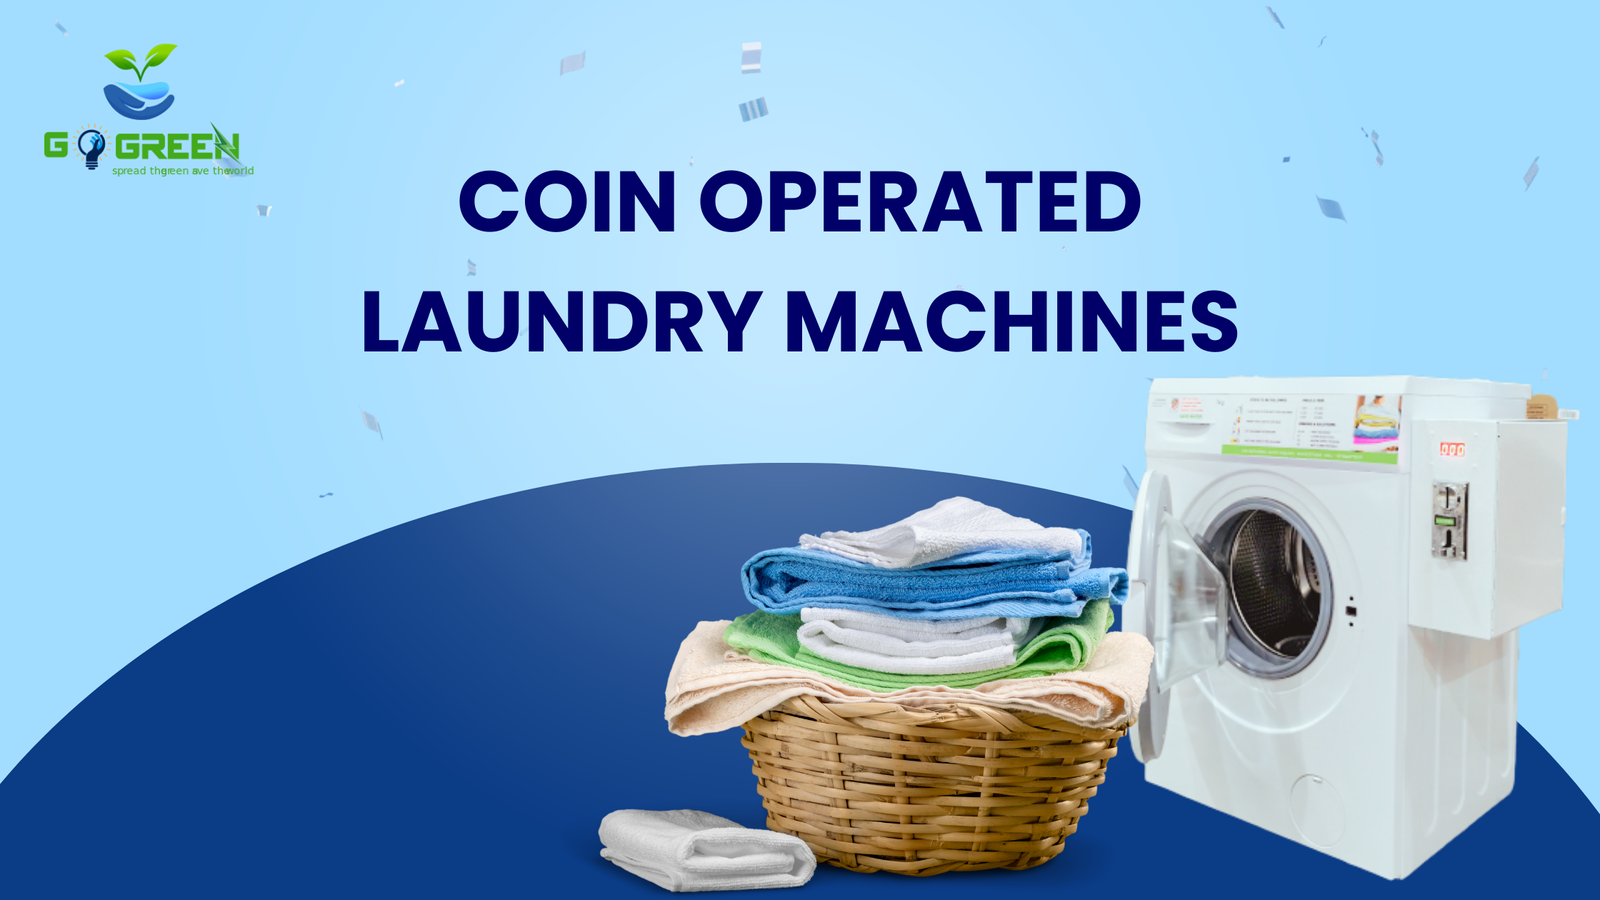 How Coin operated Washing Machines Are Making Laundry Day a Breeze